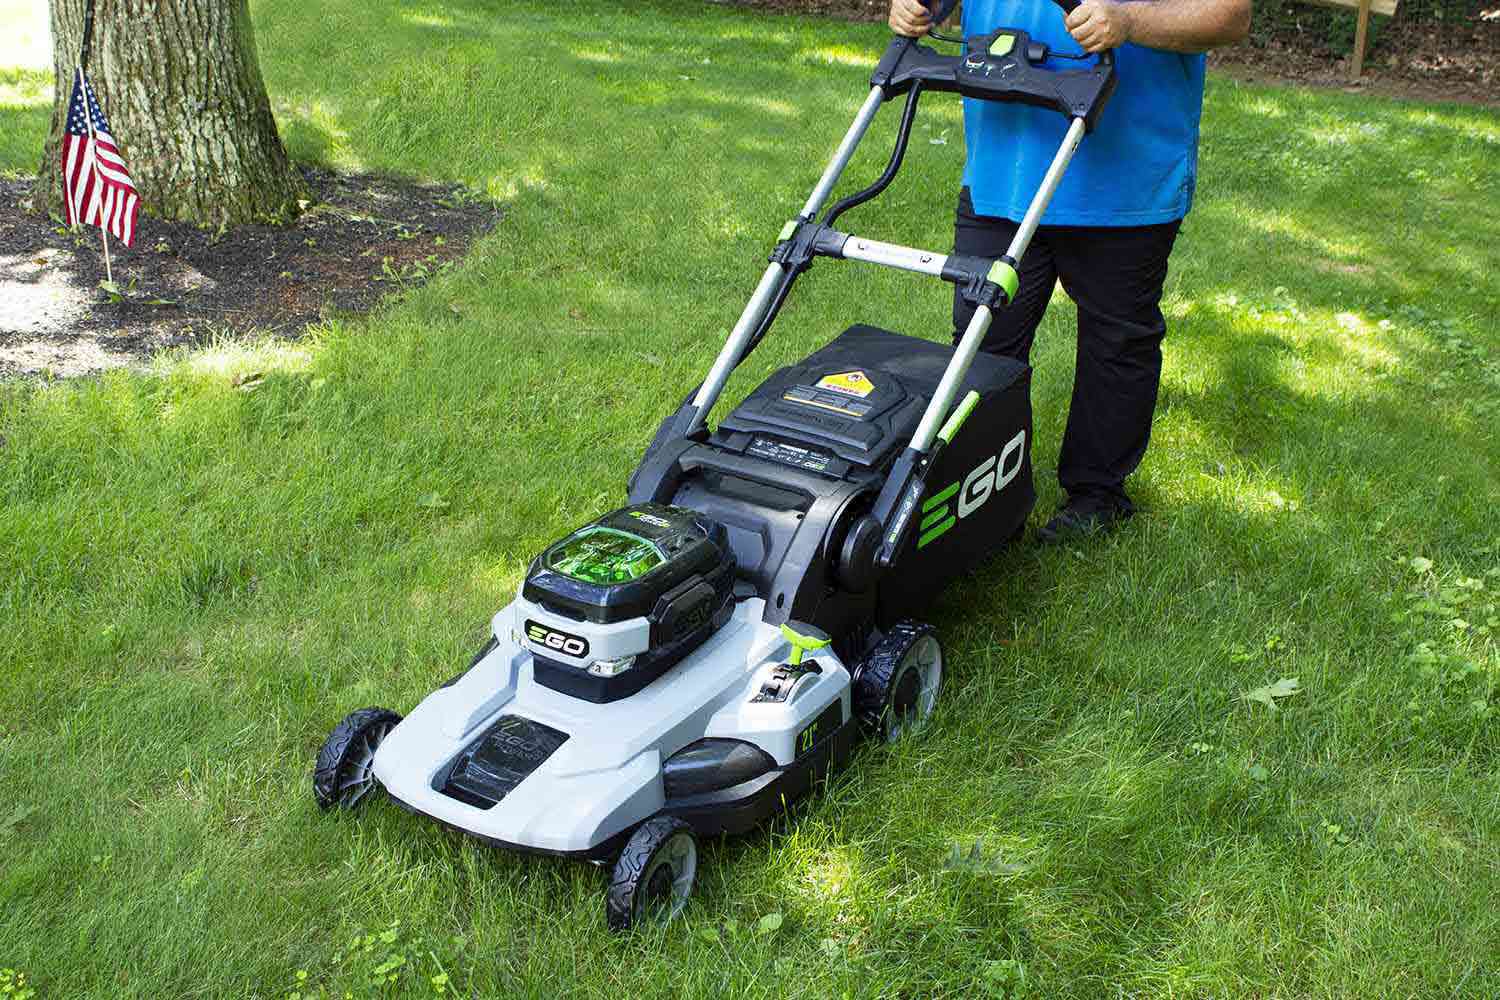 What is the Best Riding Lawn Mower for Small Yards